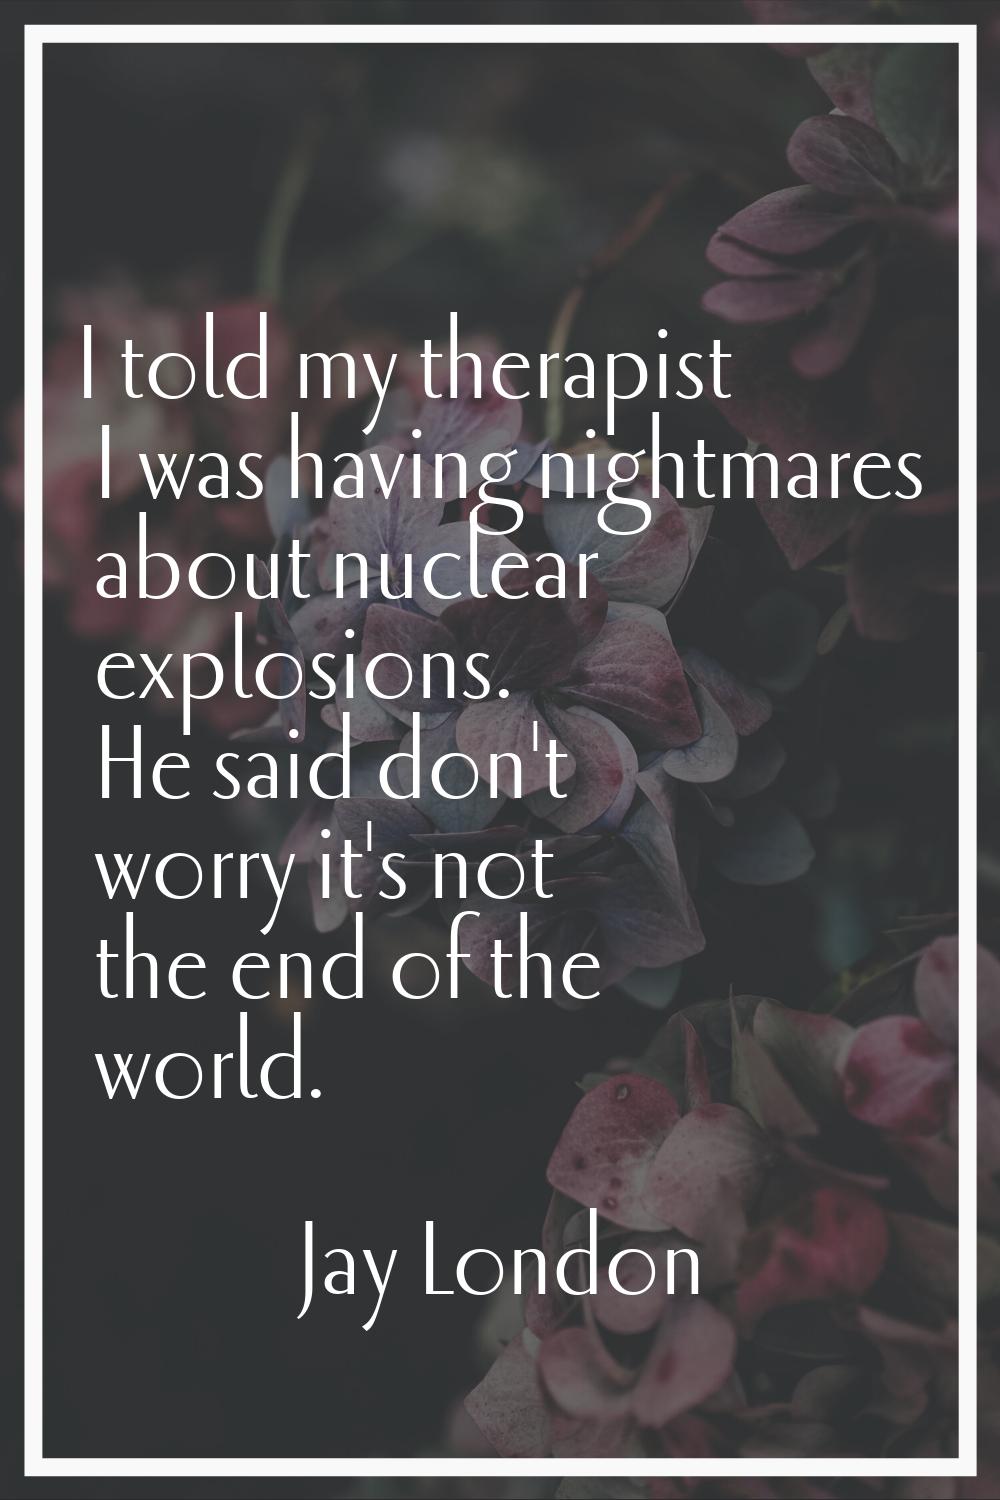 I told my therapist I was having nightmares about nuclear explosions. He said don't worry it's not 